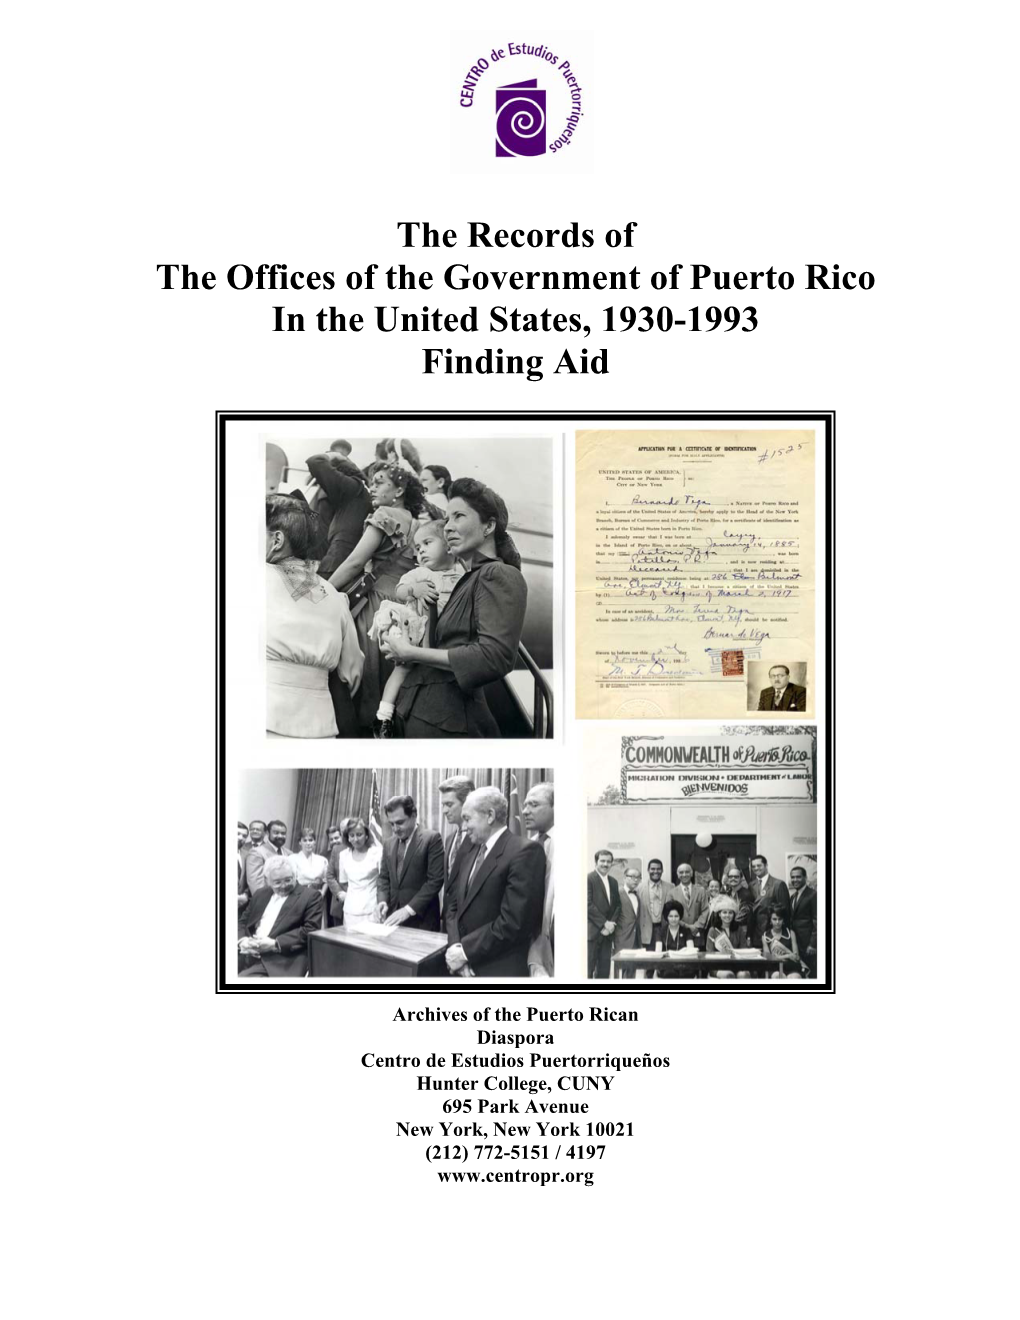 The Records of the Offices of the Government of Puerto Rico in the United States, 1930-1993 Finding Aid